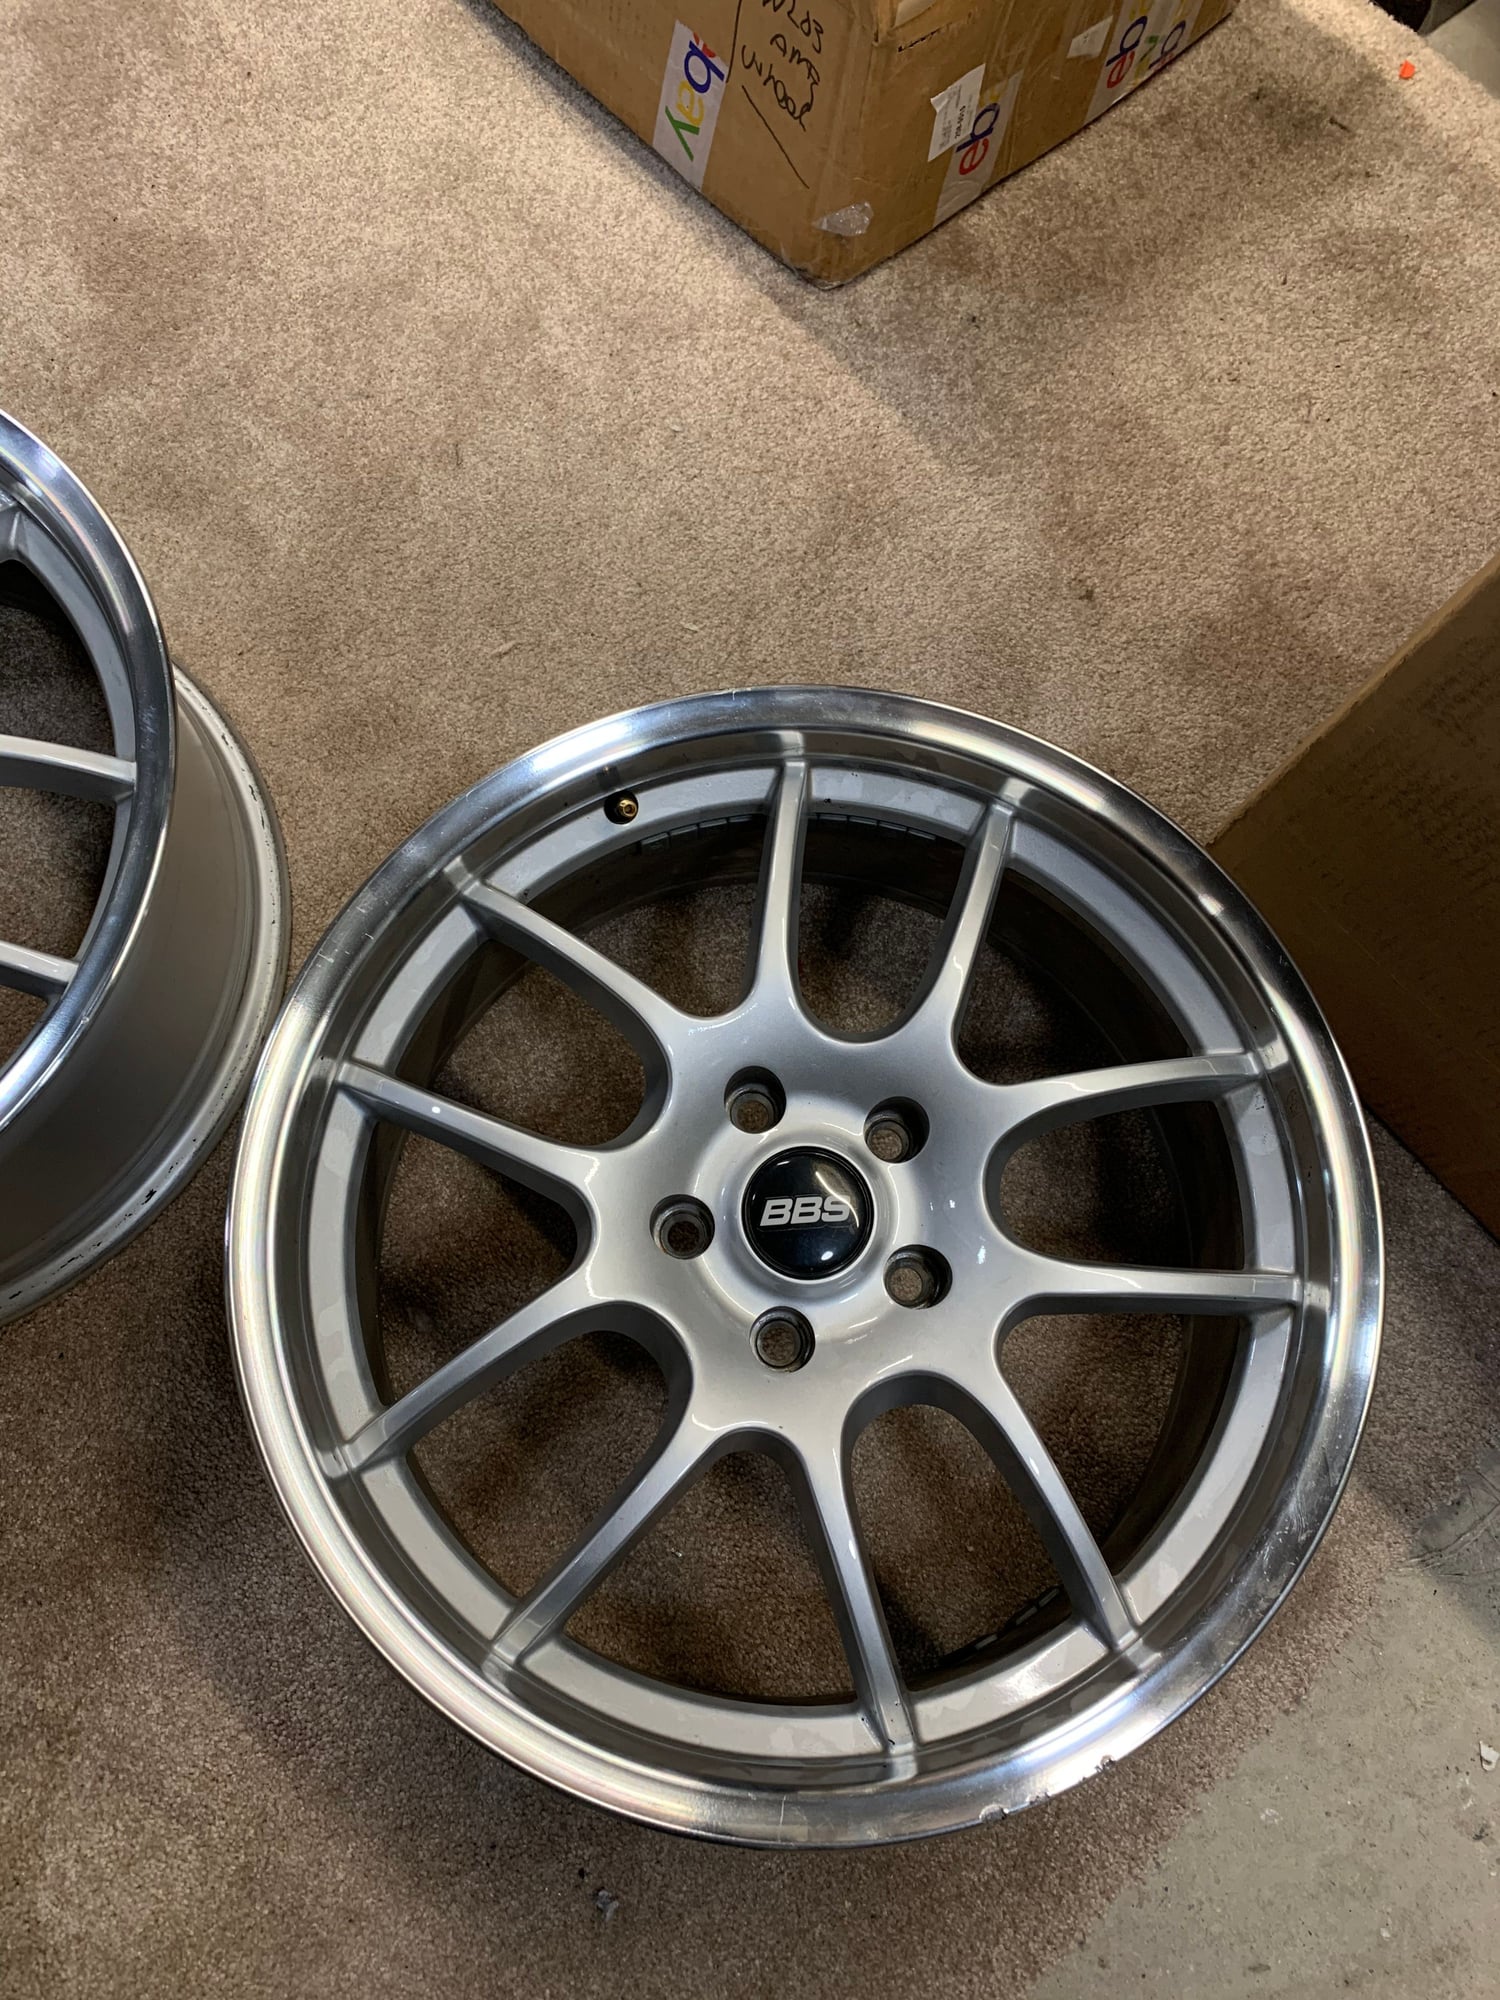 Wheels and Tires/Axles - R170 VOXX 18” rims - Used - 1999 to 2003 Mercedes-Benz SLK230 - Irvington, NY 10533, United States